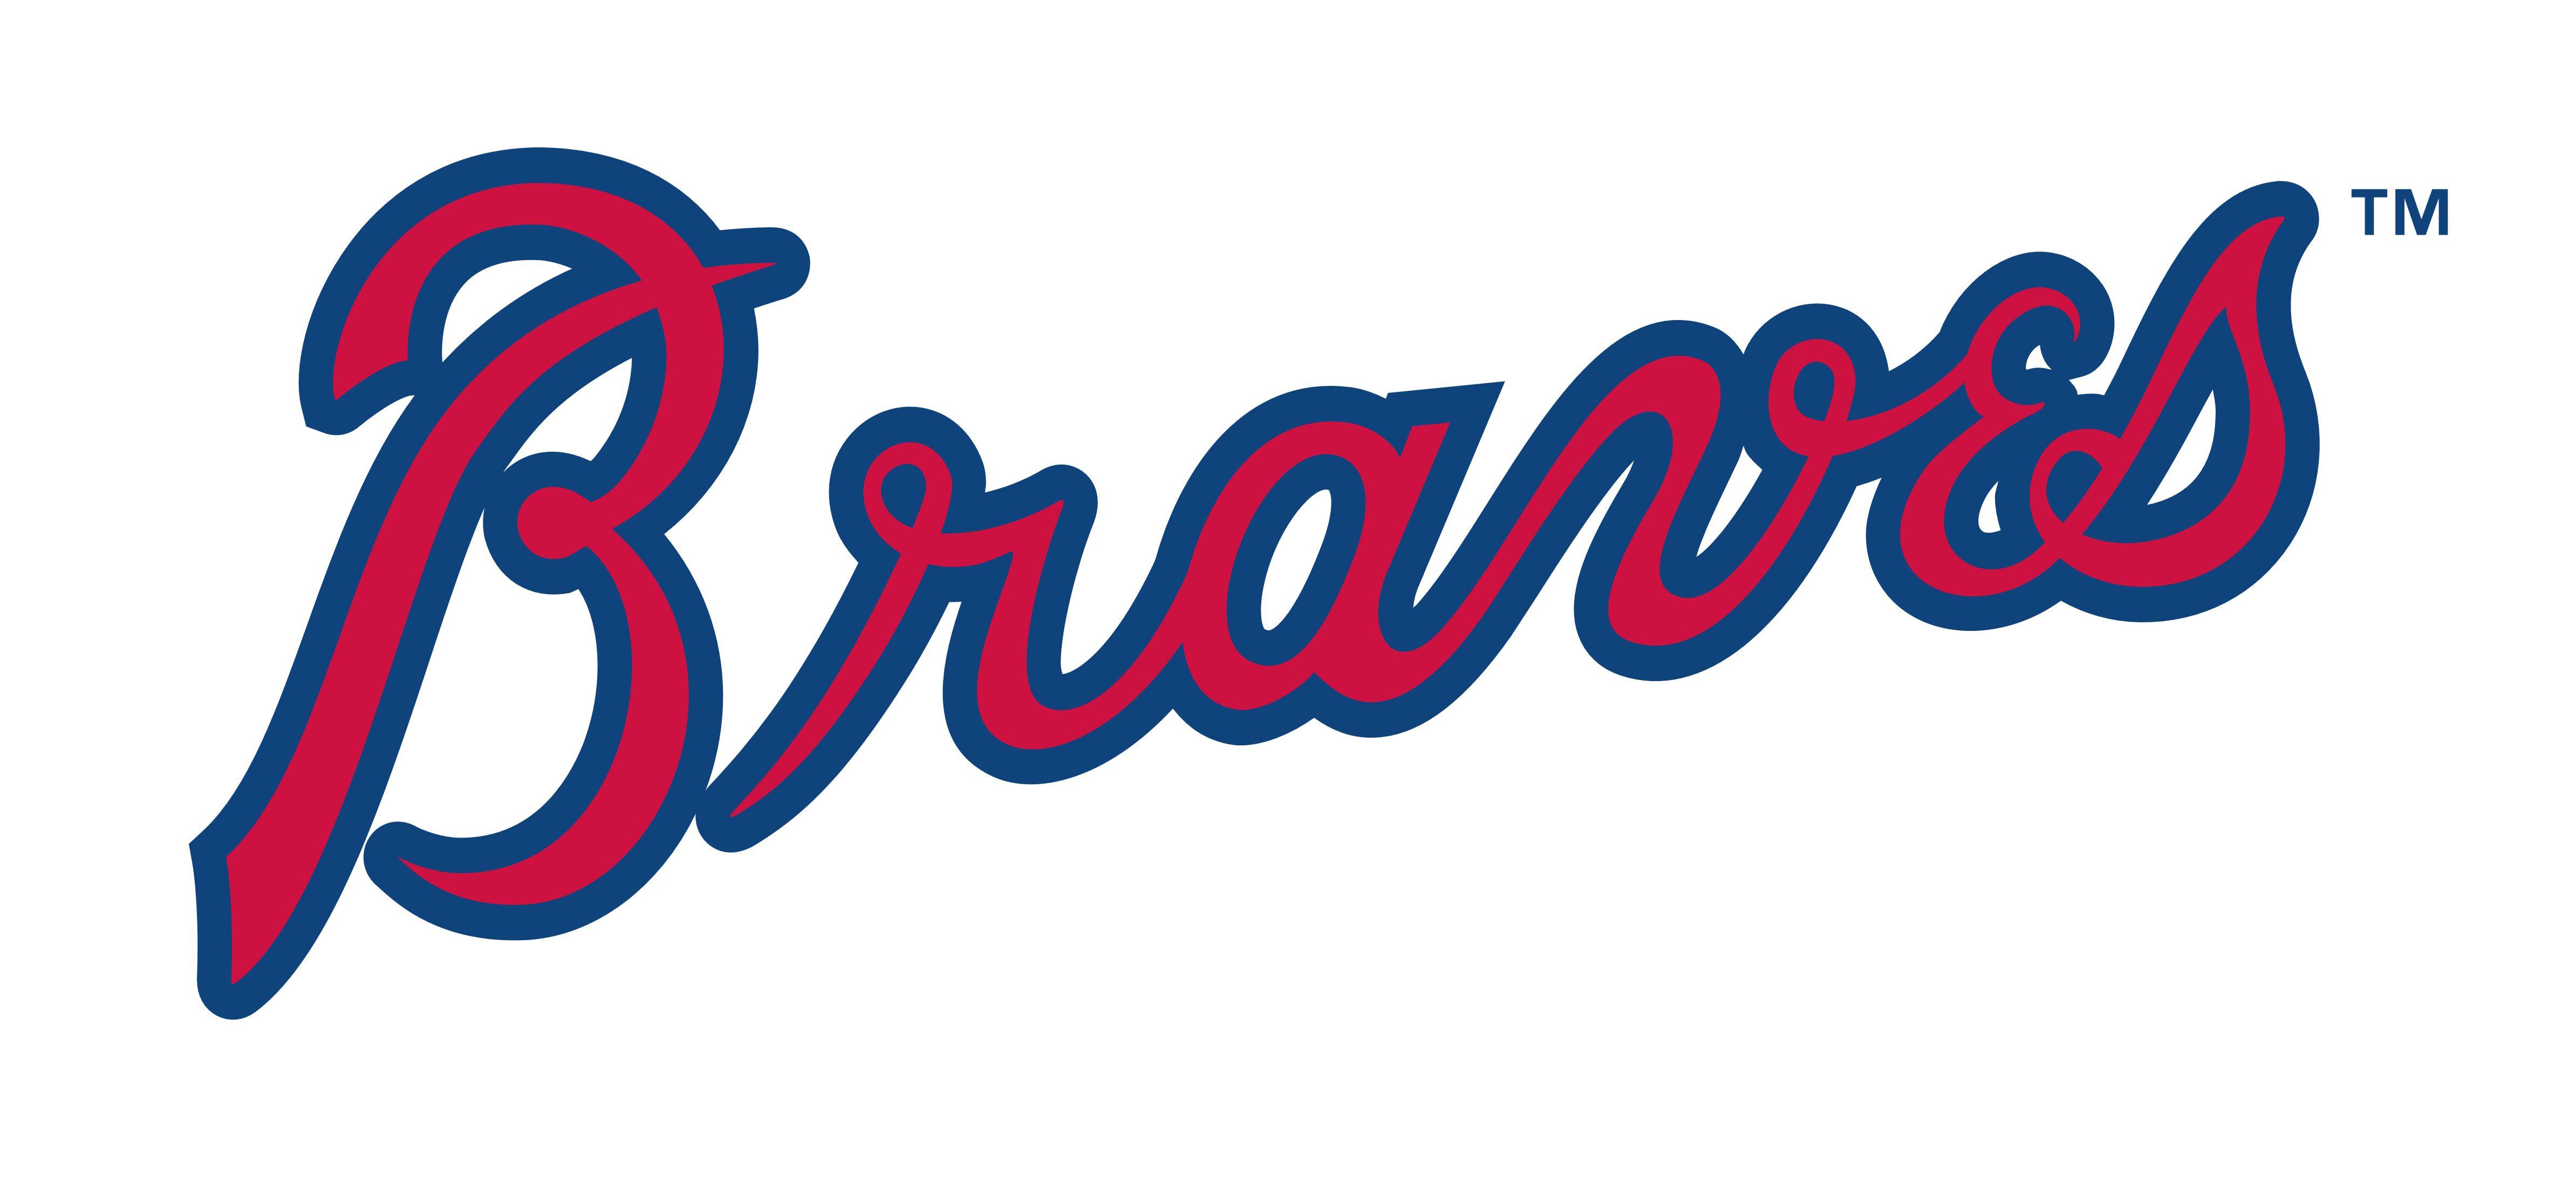 Atlanta Braves Logo - Atlanta Braves Logo, Atlanta Braves Symbol, Meaning, History and ...